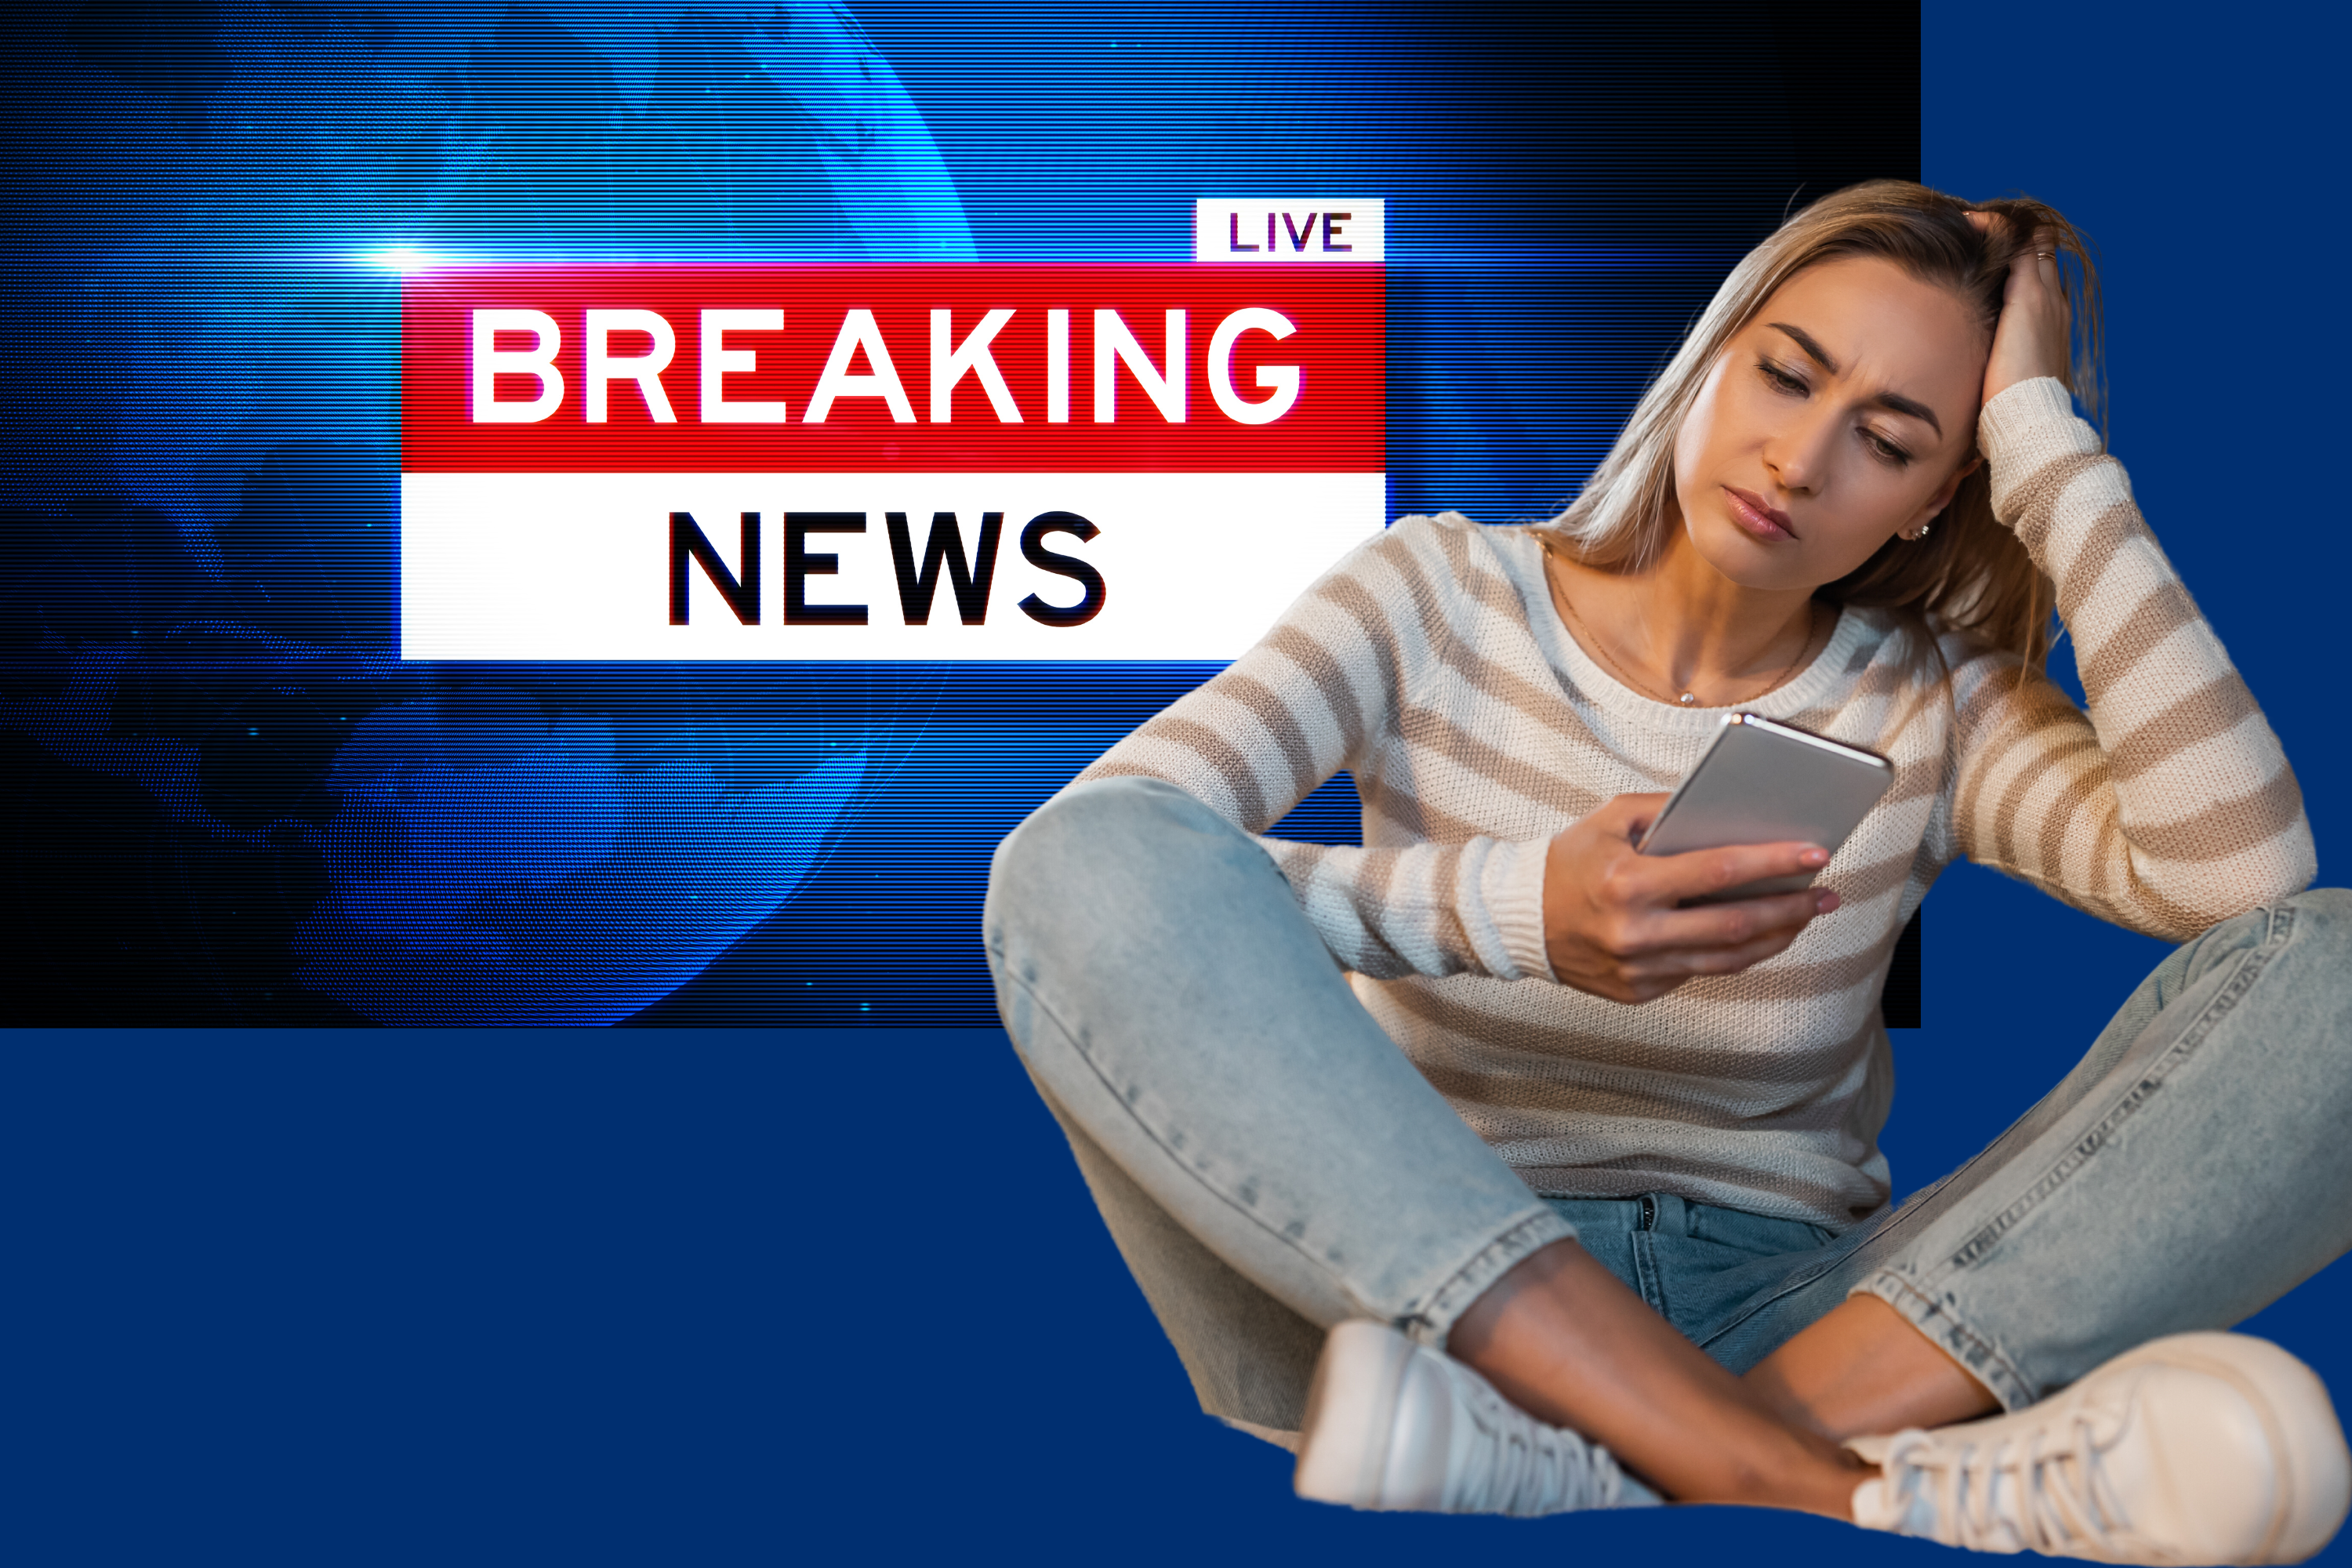 breaking news backdrop with worried looking young woman looking at phone in foreground